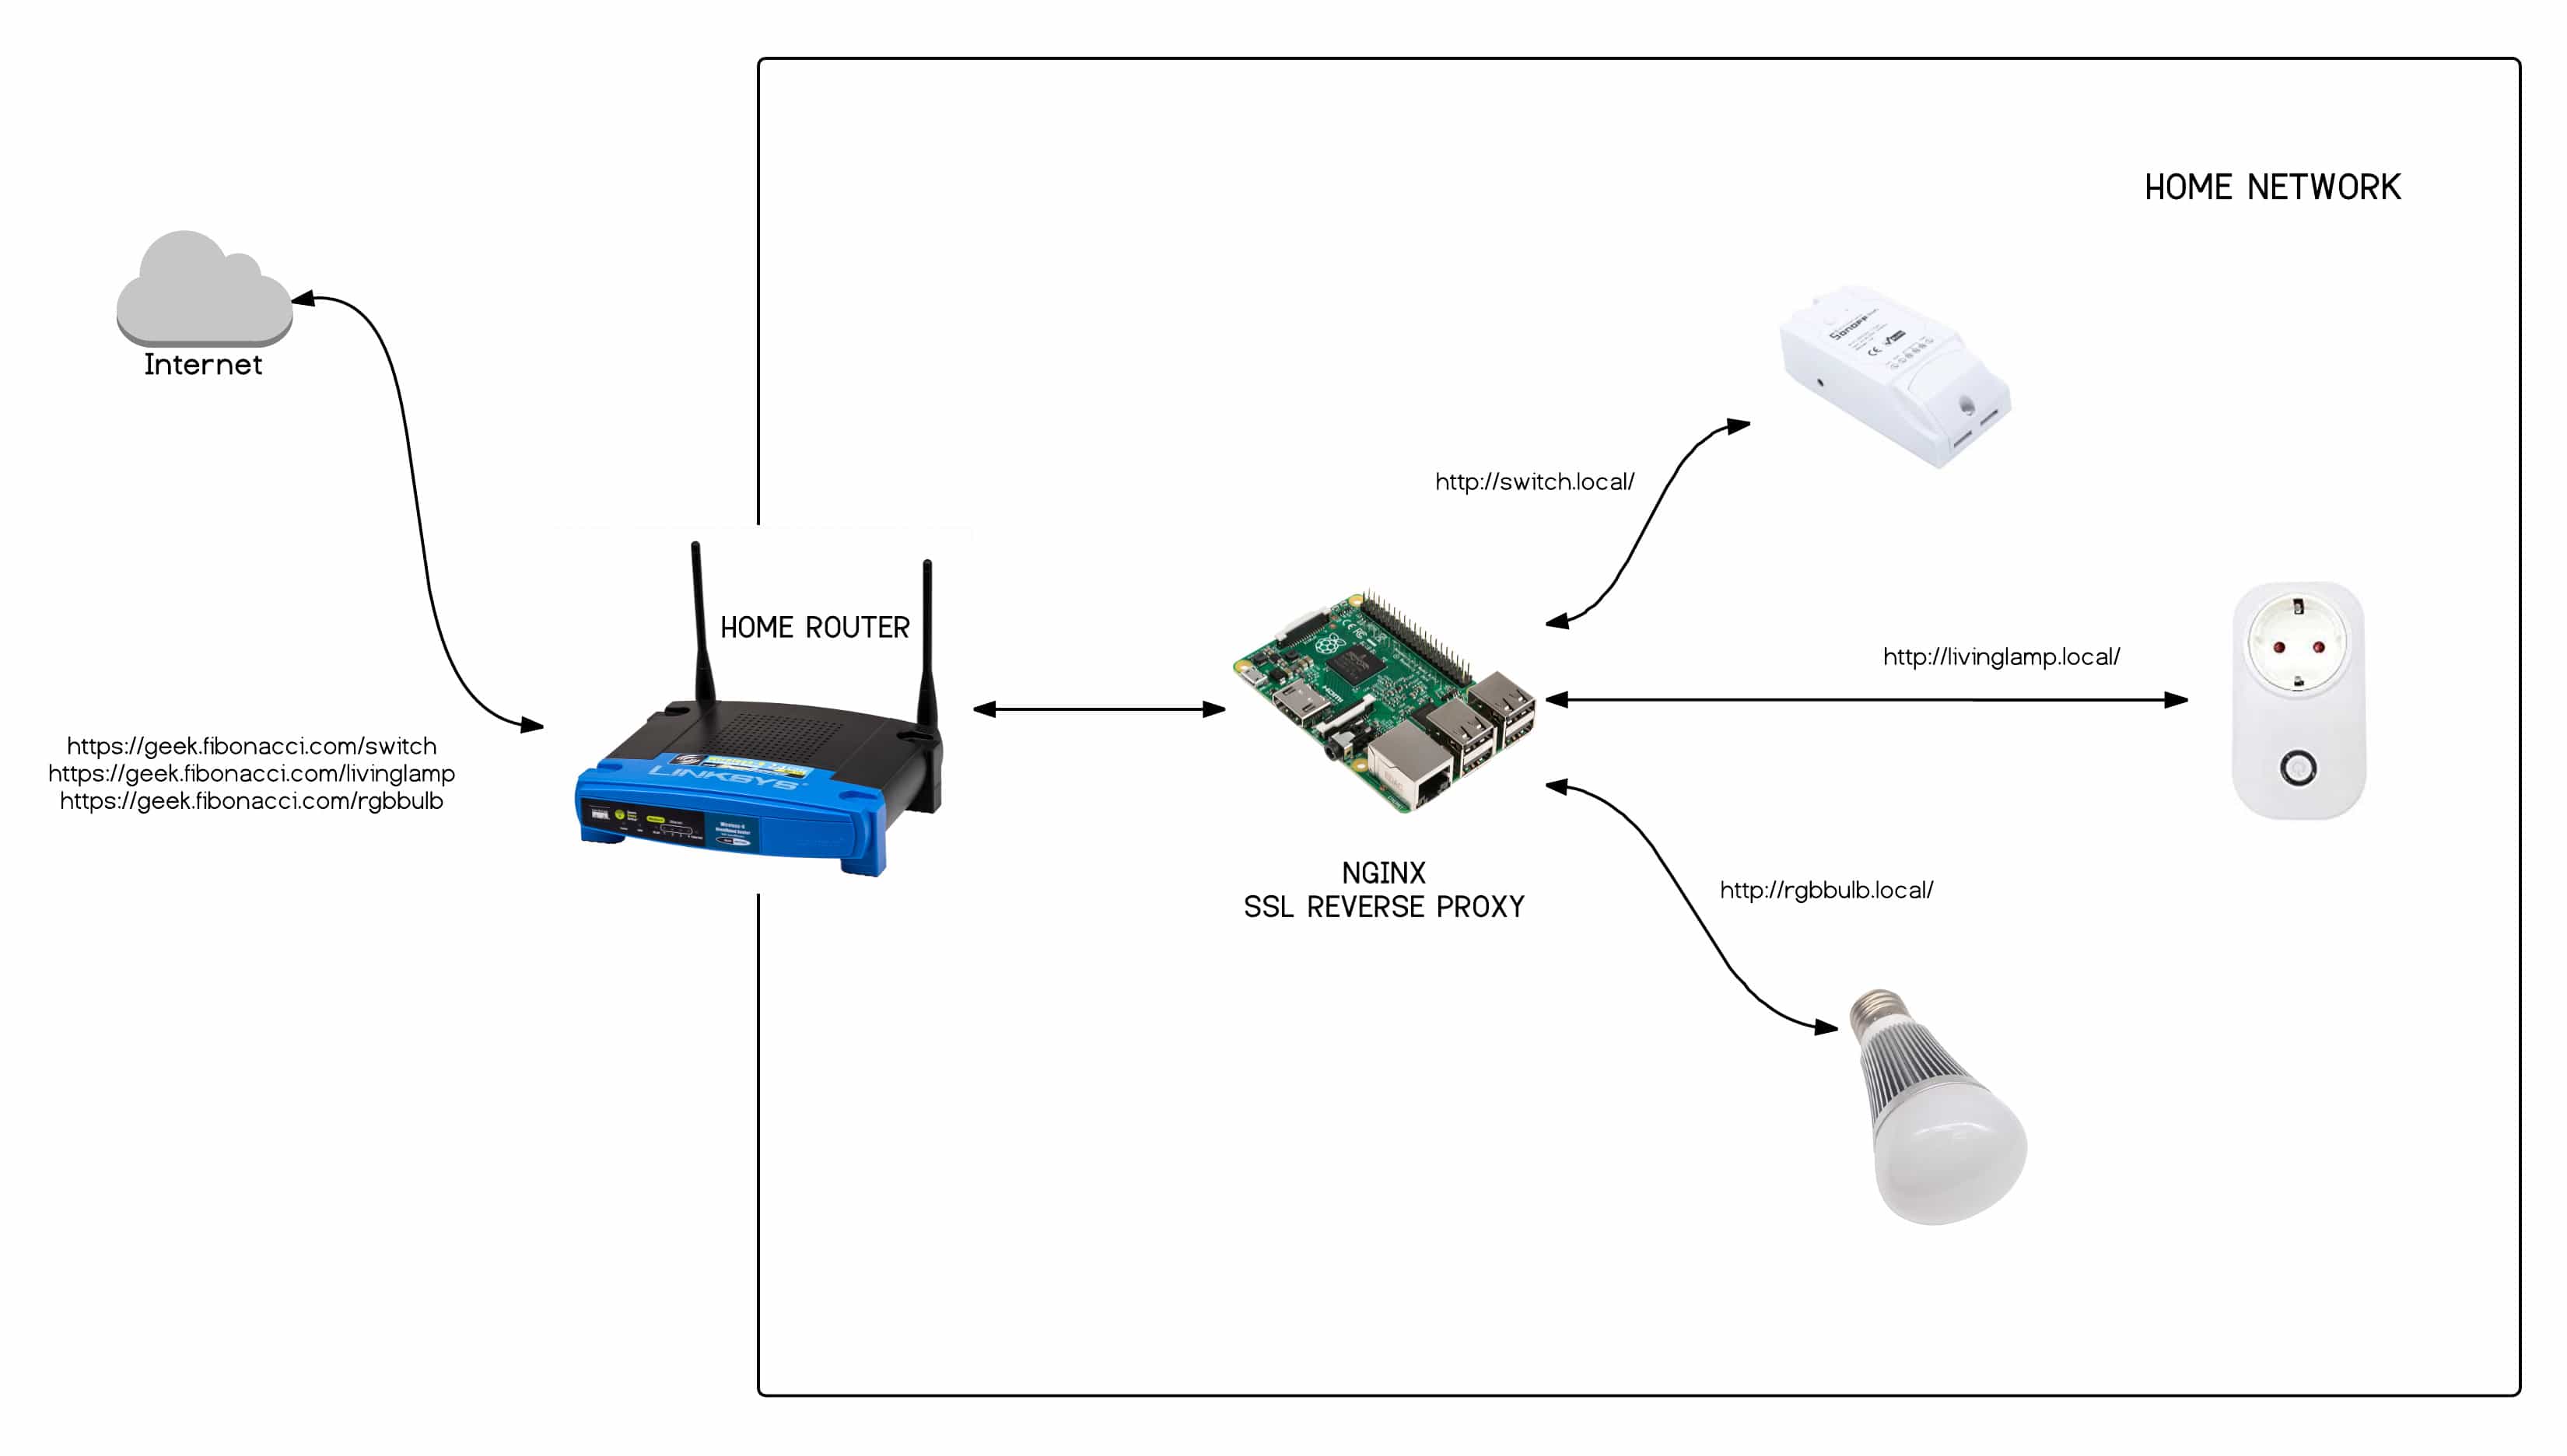 alarm klæde sig ud Haiku Secure Remote Access to Your IoT Devices - Tinkerman